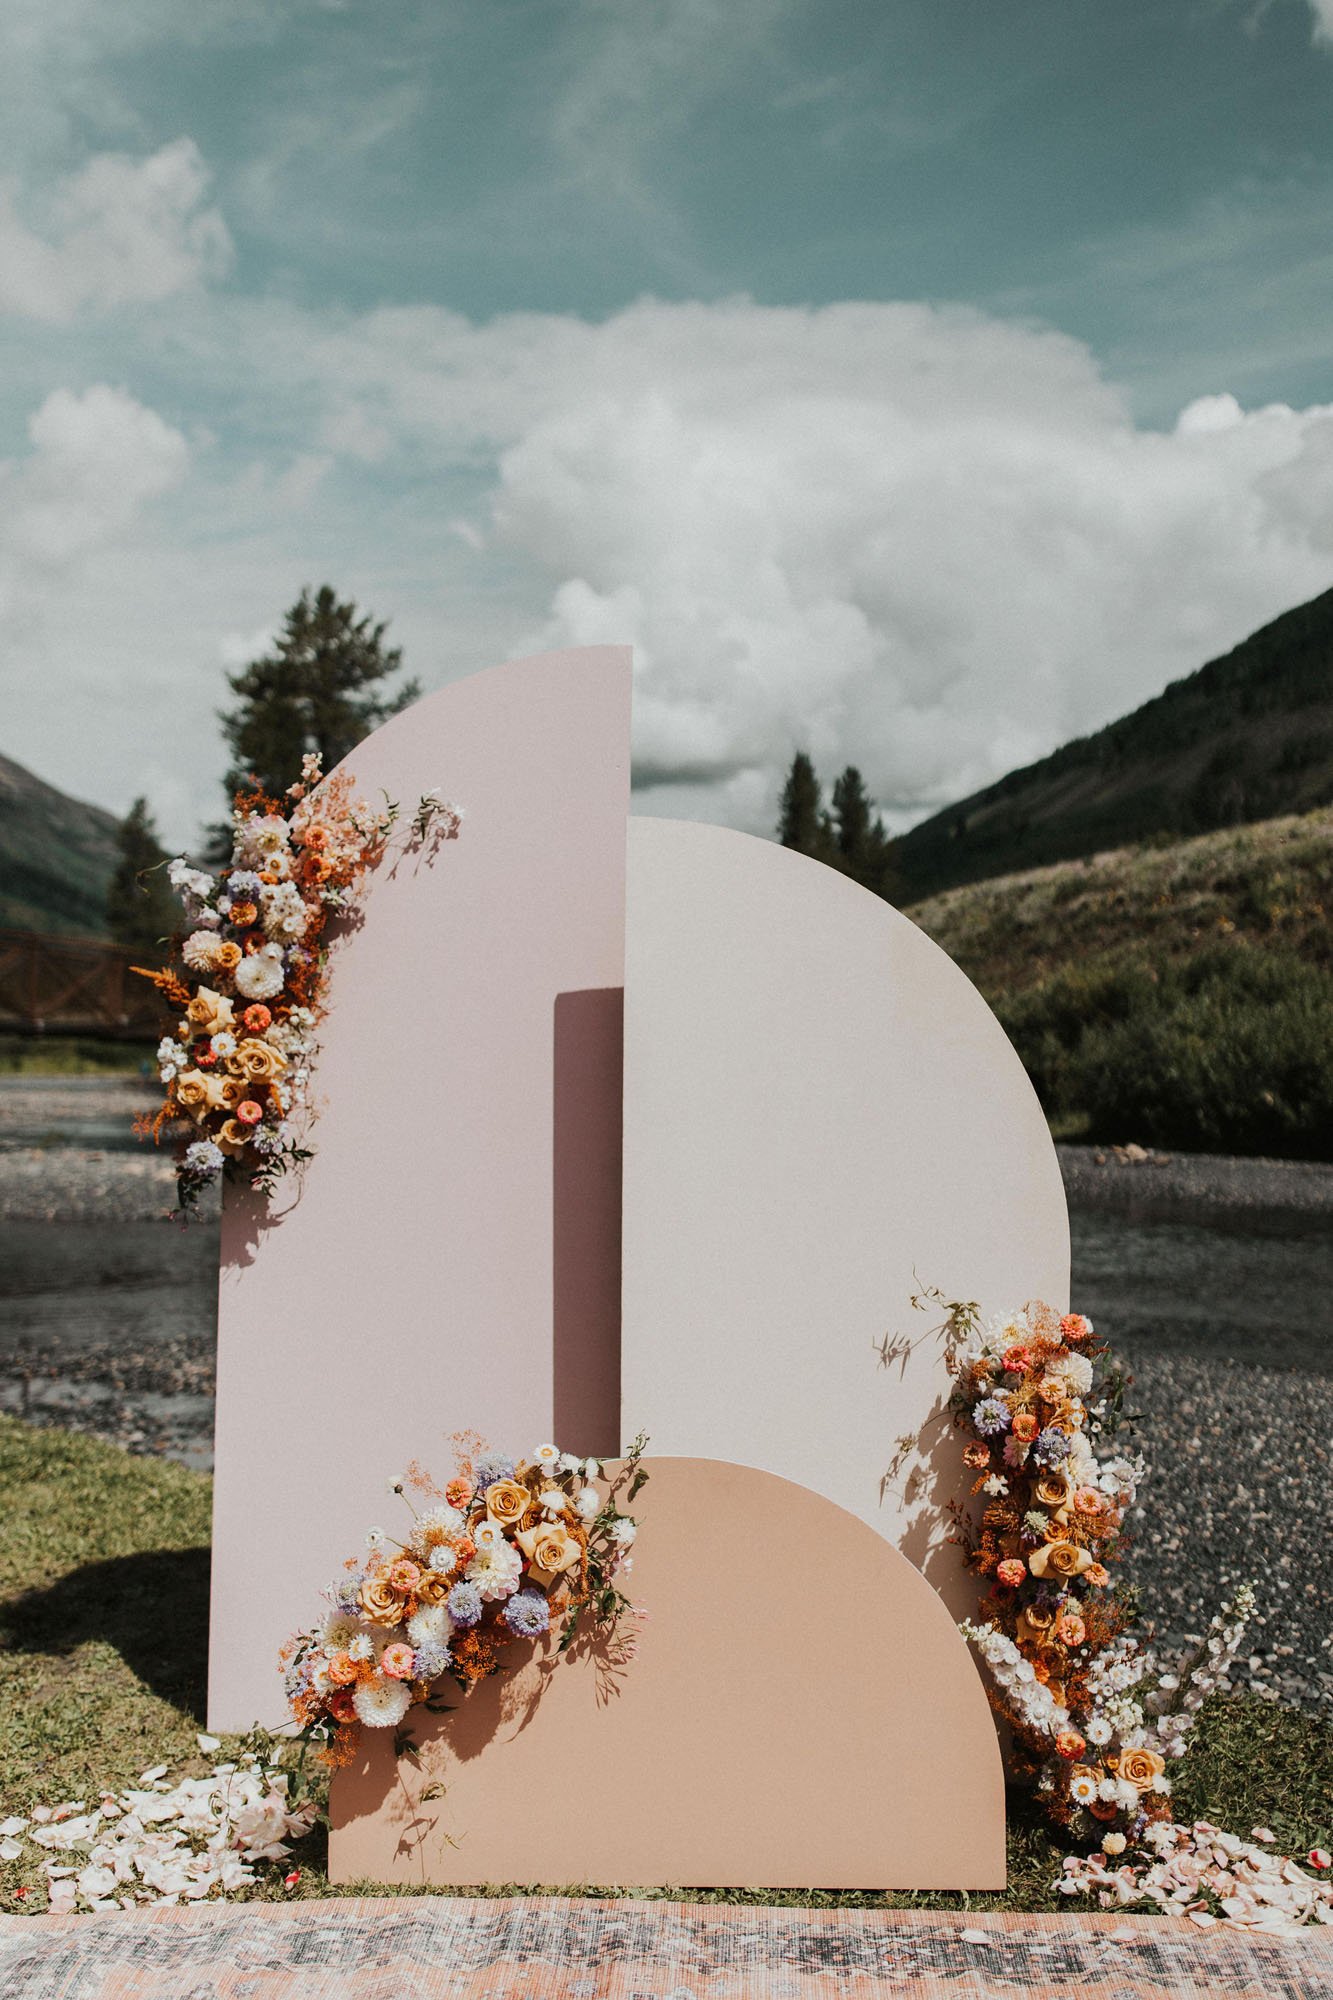  Photograph of a modern geometric ceremony backdrop in front of a creek in Crested Butte, Colorado. The backdrop is made of semi-arches of varying heights and shades of beige and pink and is decorated with florals in white, orange, beige, purple, and